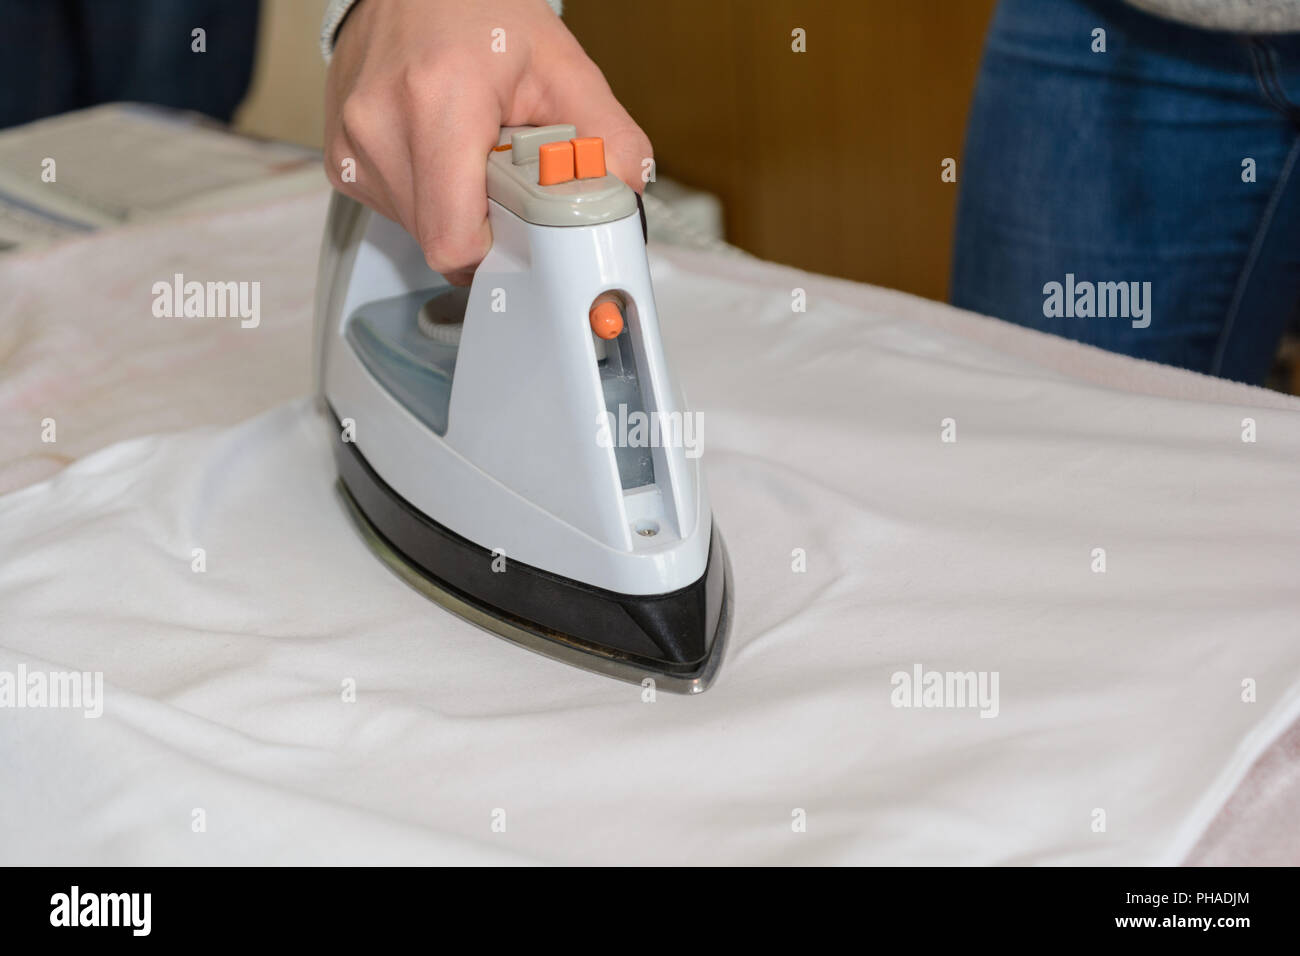 Iron on the ironing table with steam iron Stock Photo